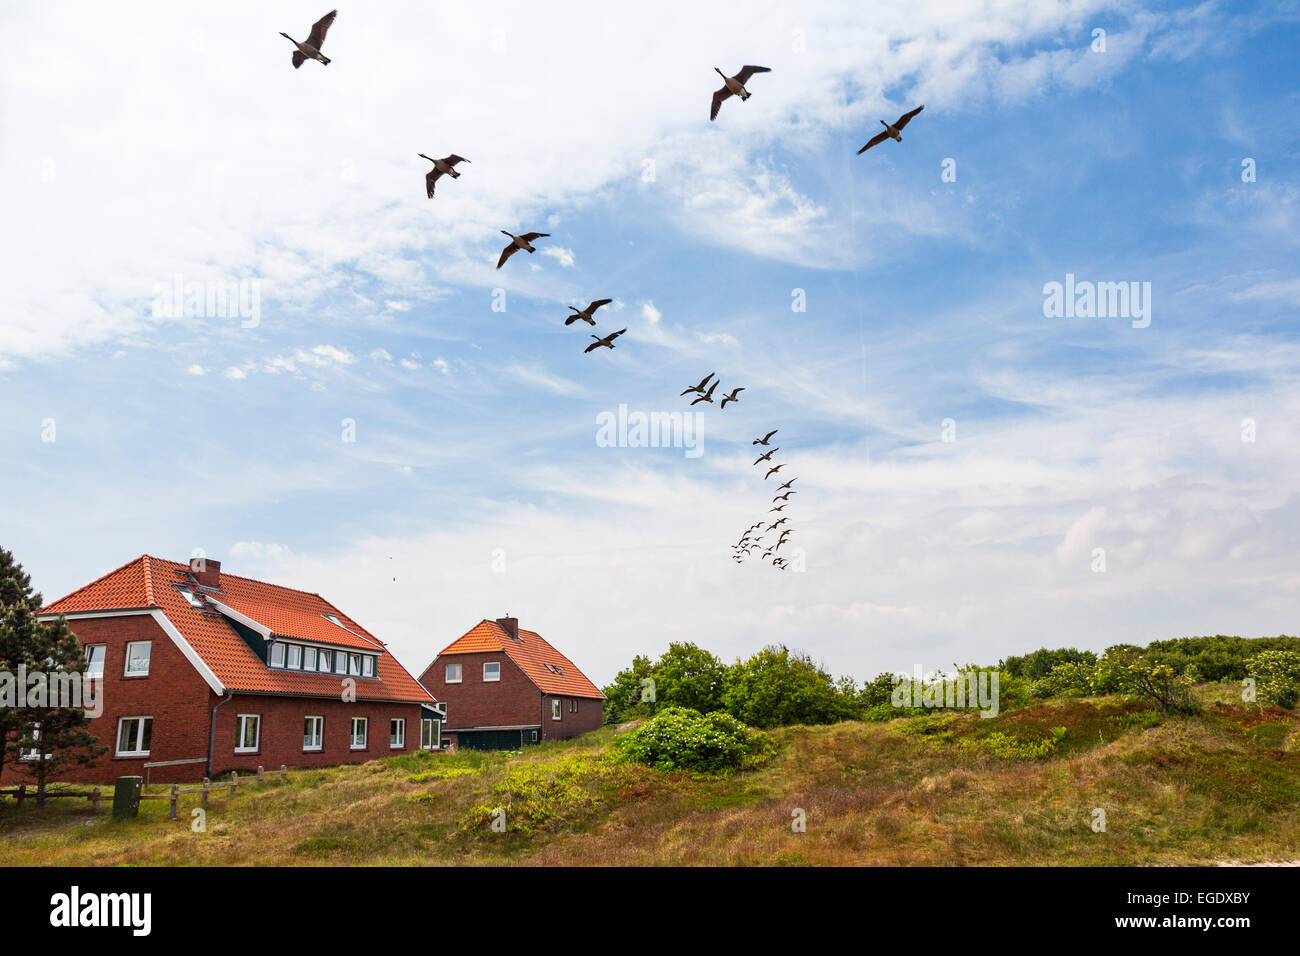 Houses in the dunes with wild geese flying overhead, Branta canadensis, Spiekeroog Island, Nationalpark, North Sea, East Frisian Islands, East Frisia, Lower Saxony, Germany, Europe Stock Photo